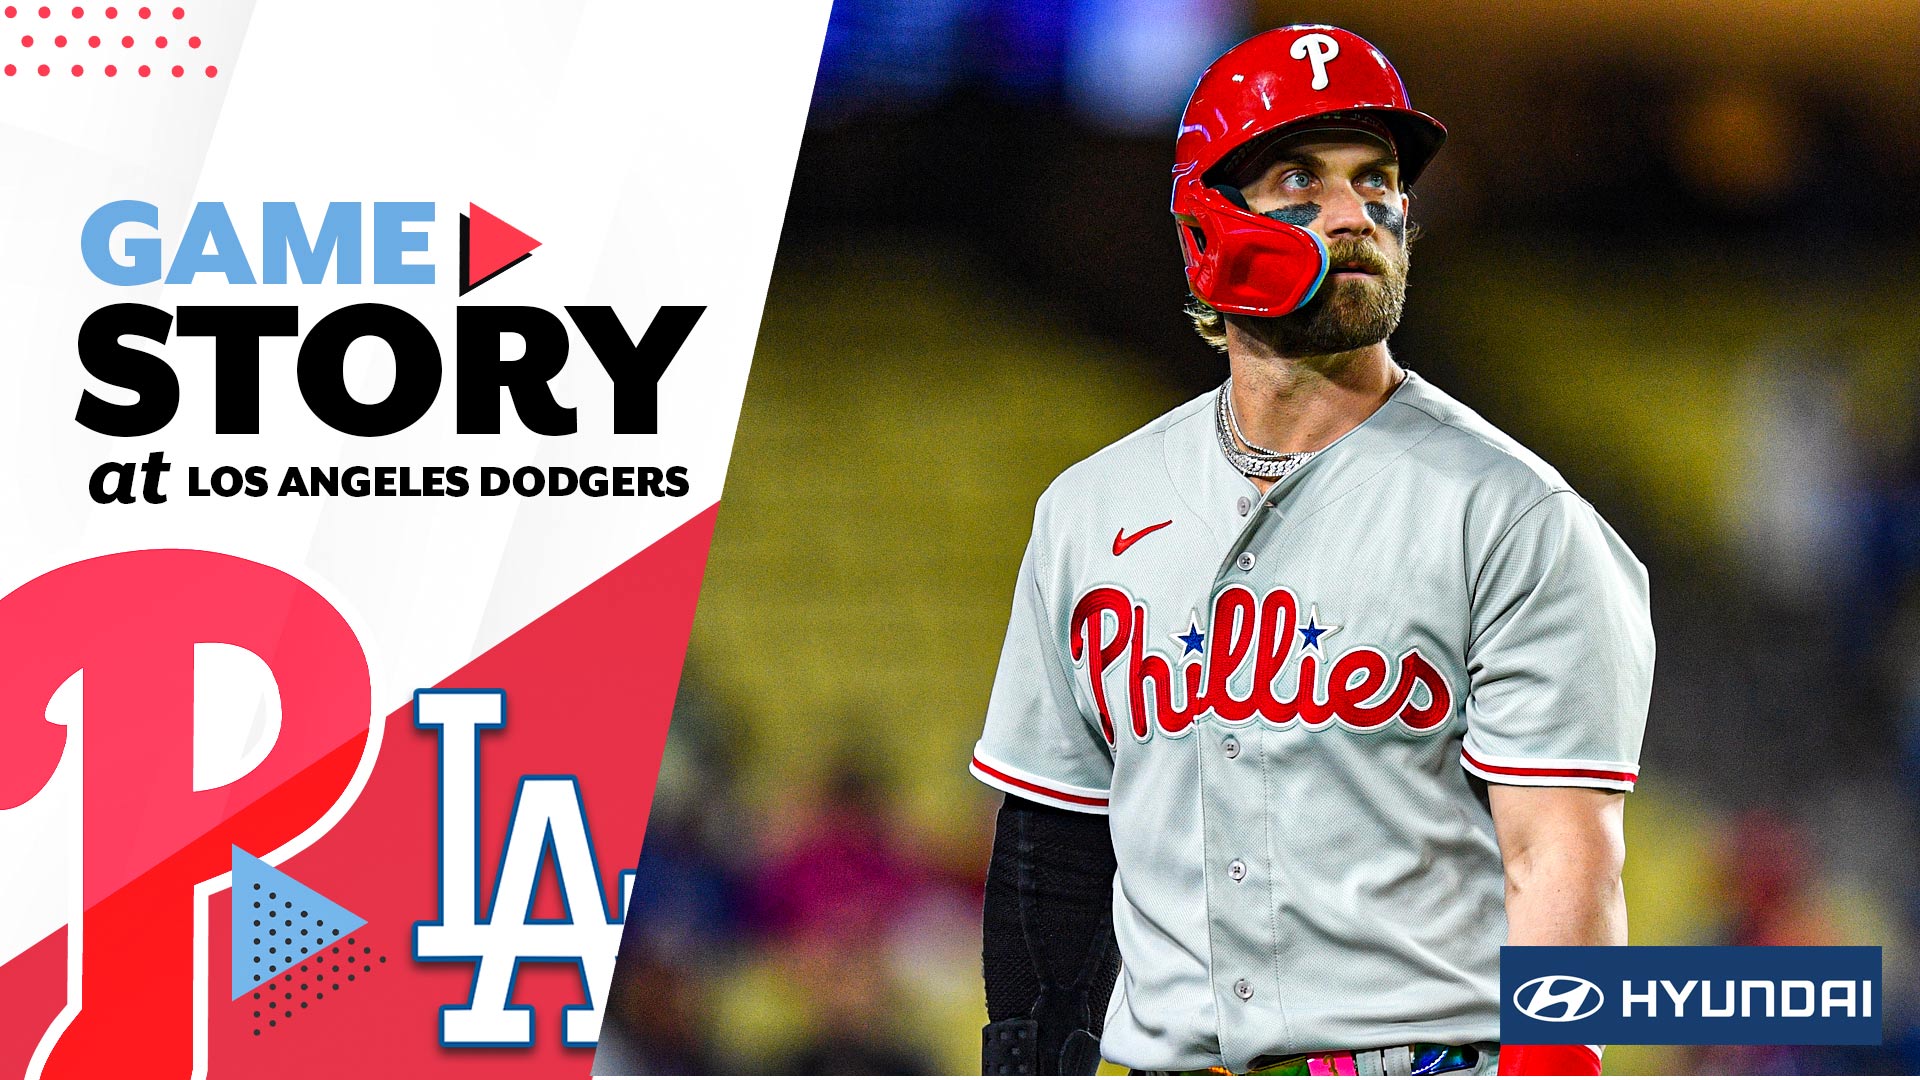 MLB - BRYCE HARPER IS BACK. The Philadelphia Phillies have activated the  superstar ahead of tonight's game in L.A.